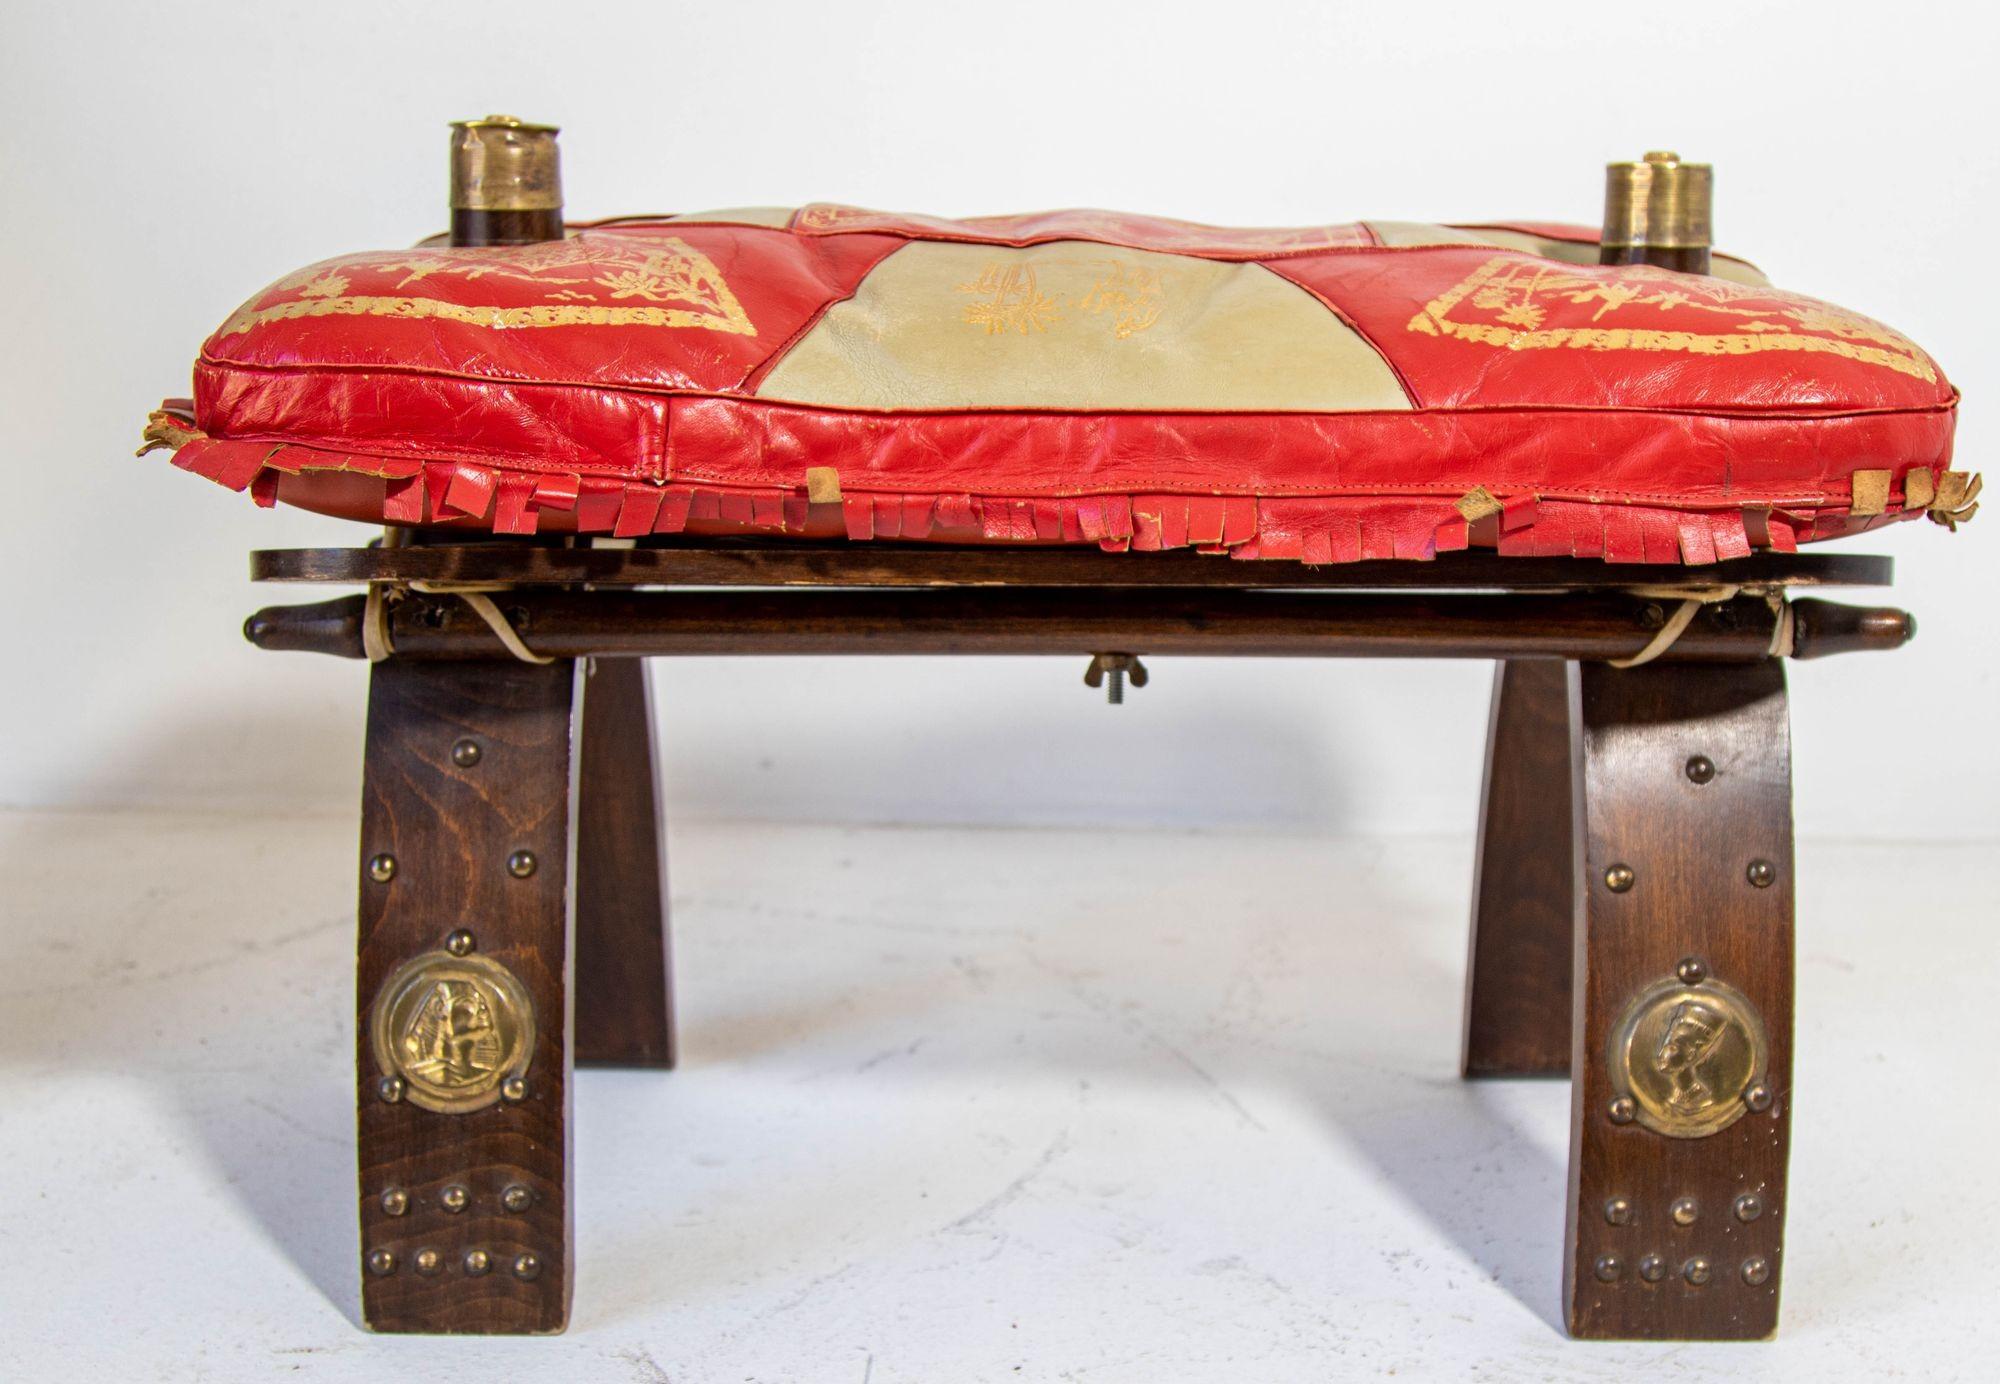 1950s Egyptian Ottoman Camel Saddle Stool with Red and Gold Cushion For Sale 4